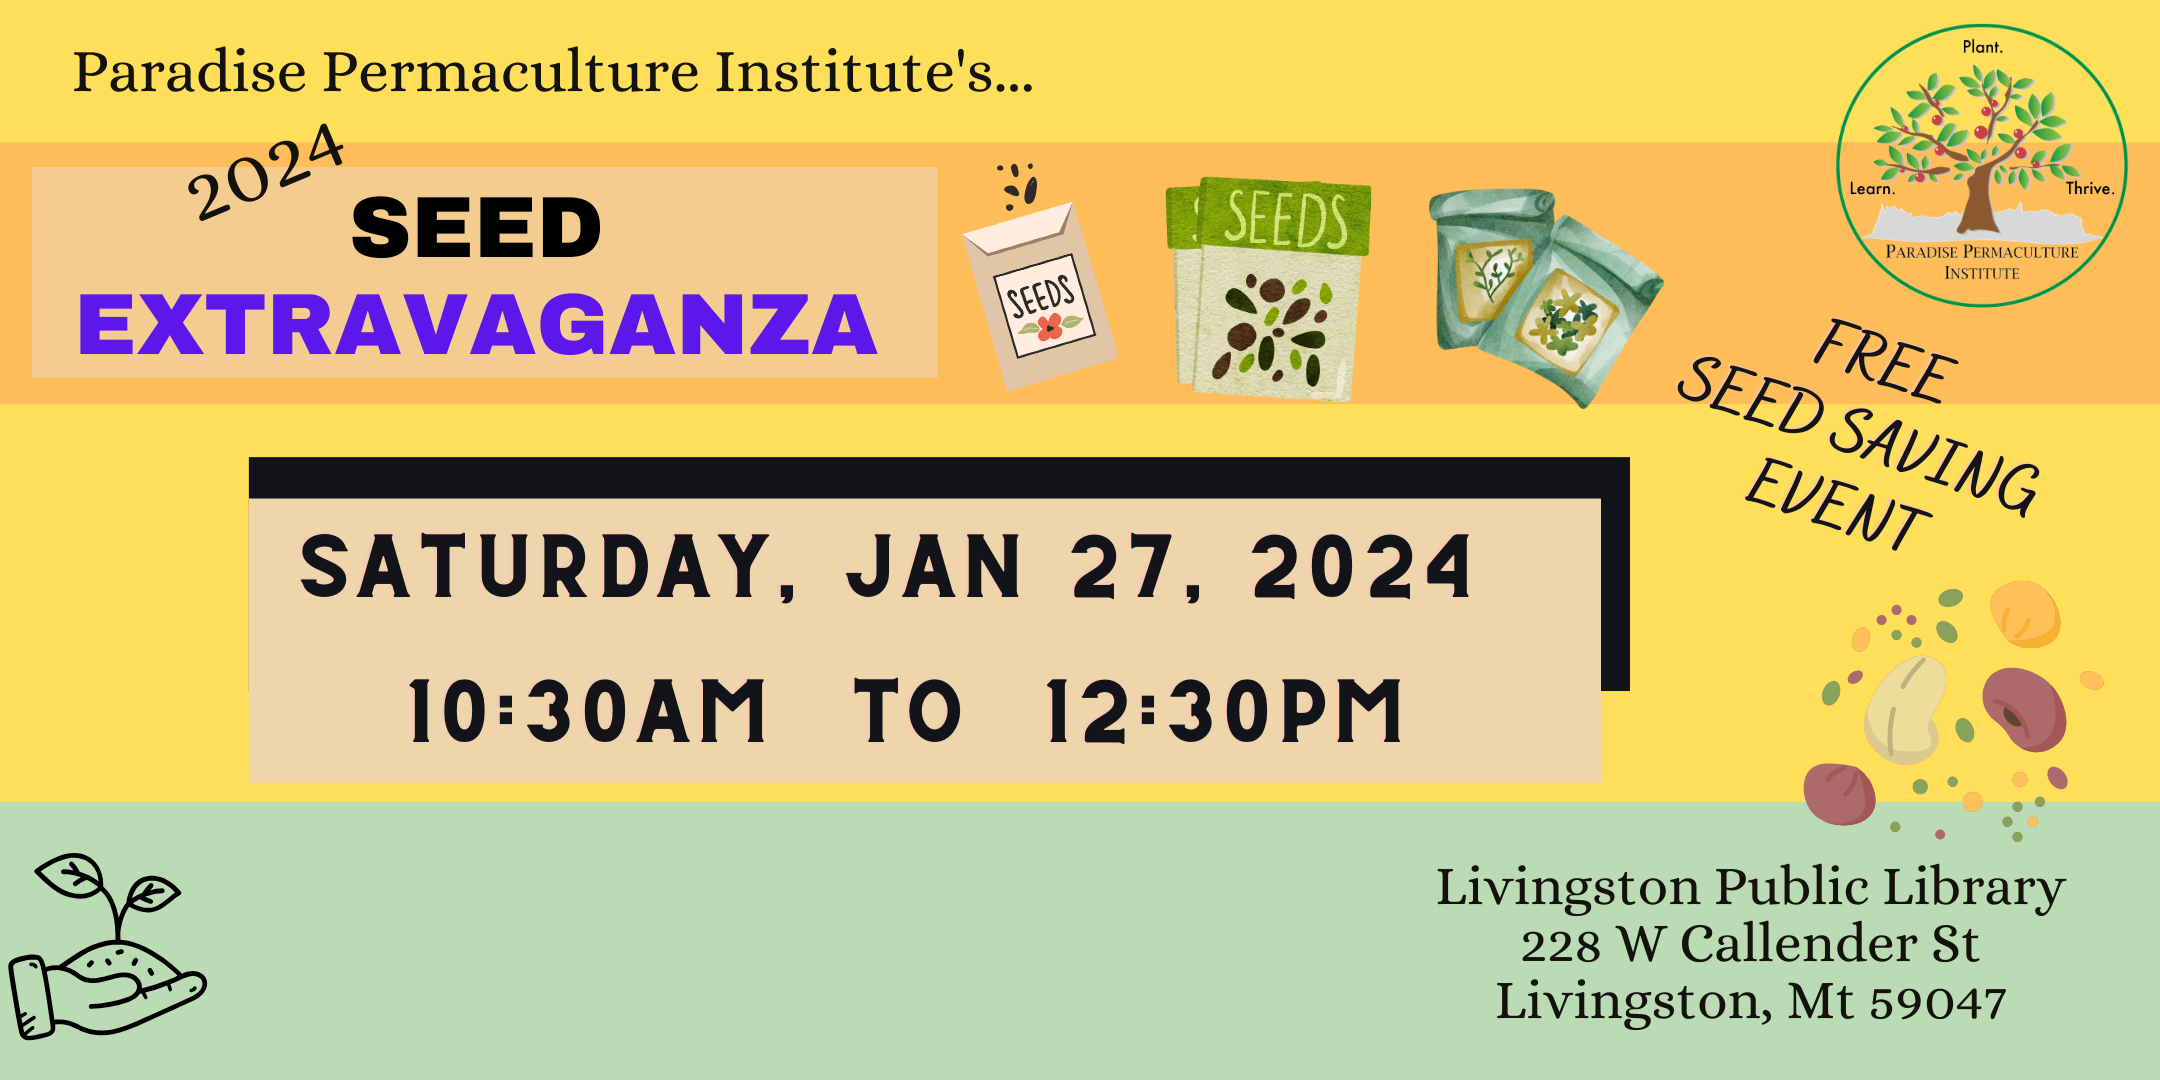 PPI's 2024 Free Seed Saving Event